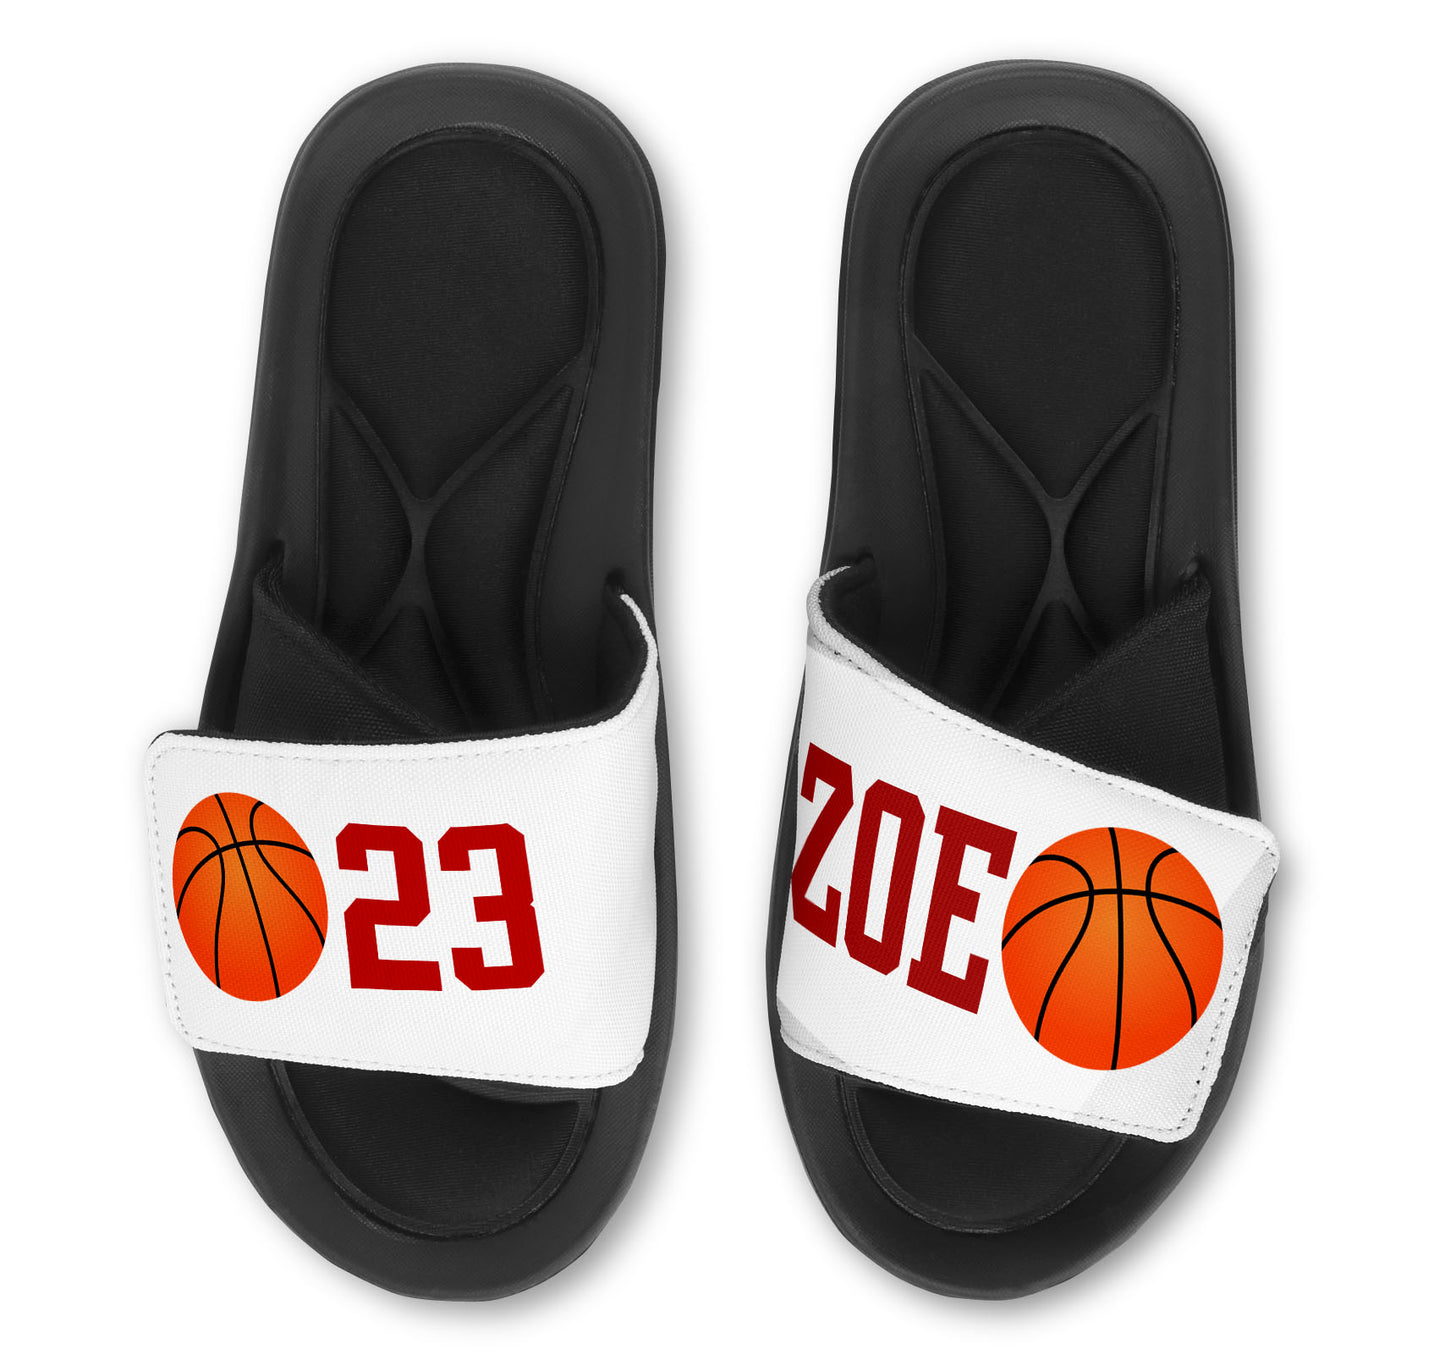 BASKETBALL Slides (Single Ball) - Customize with Your Name and/or Number